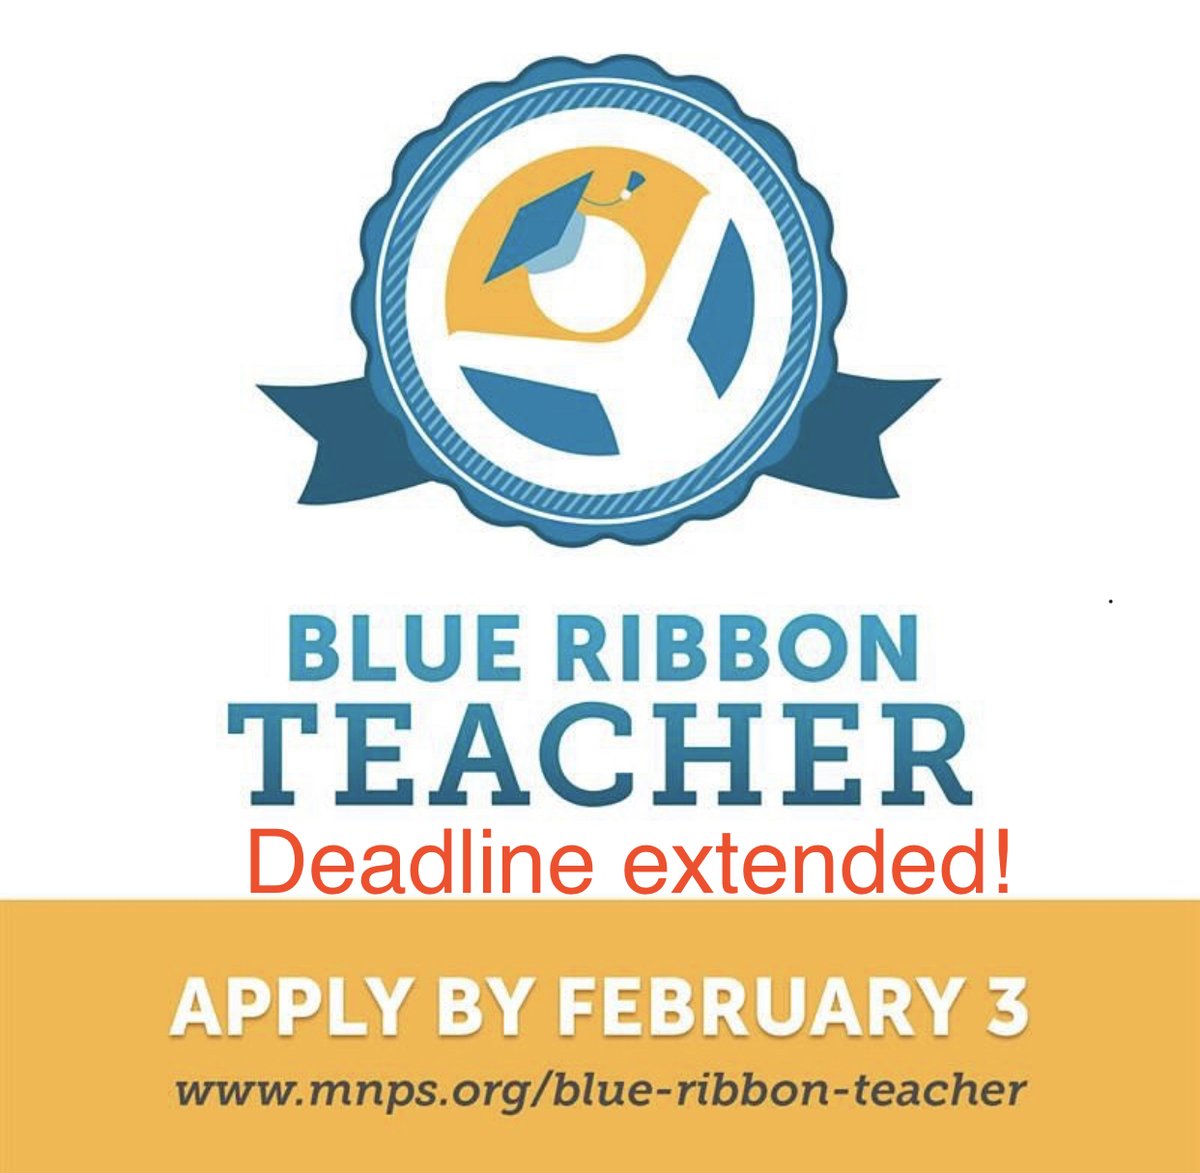 We heard you and have extended the deadline! Applications for the Blue Ribbon Teacher Award now due February 3. Apply at mnps.org/blue-ribbon-te…